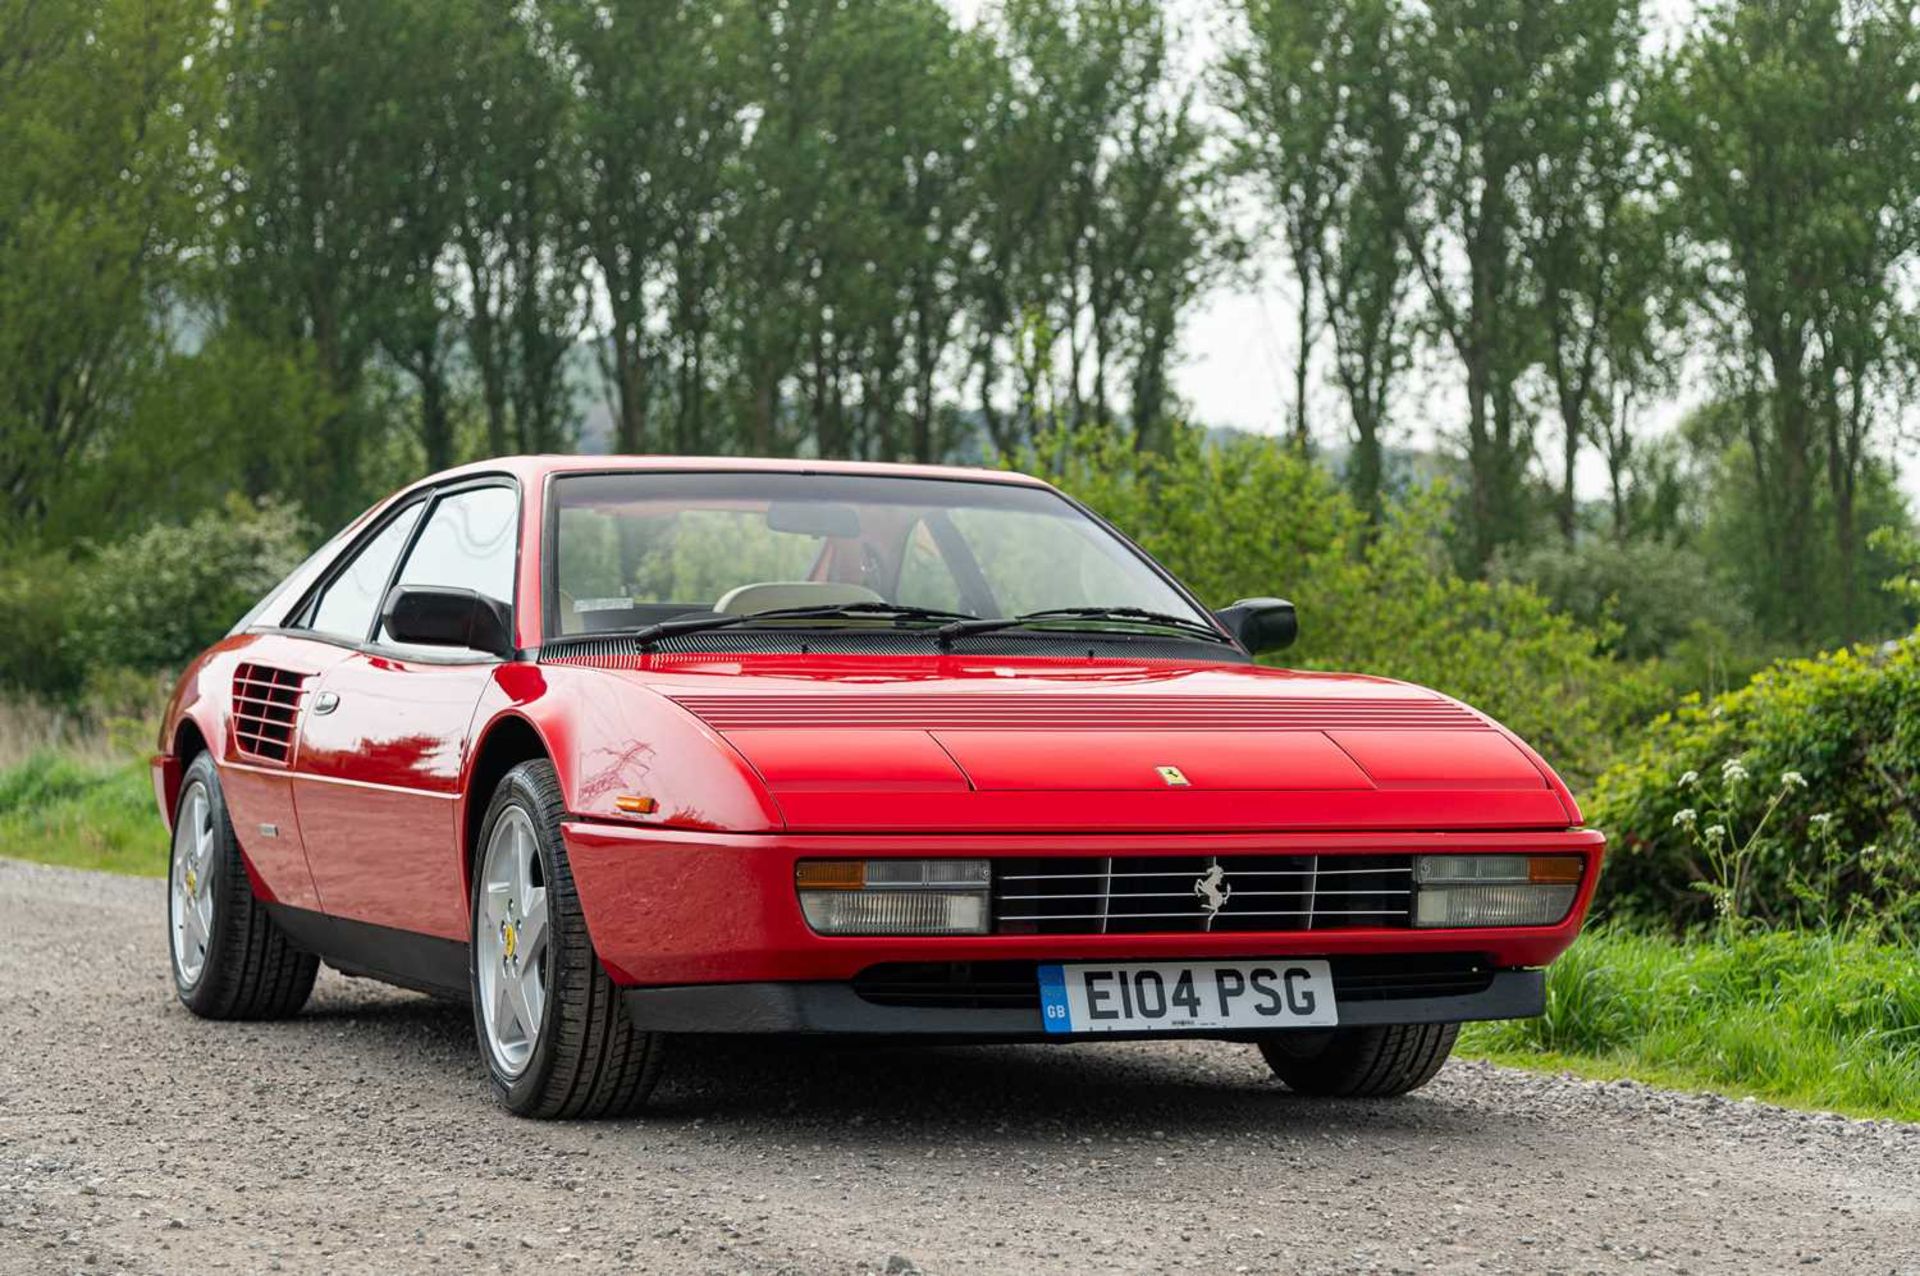 1988 Ferrari Mondial QV ***NO RESERVE*** Remained in the same ownership for nearly two decades finis - Image 5 of 91